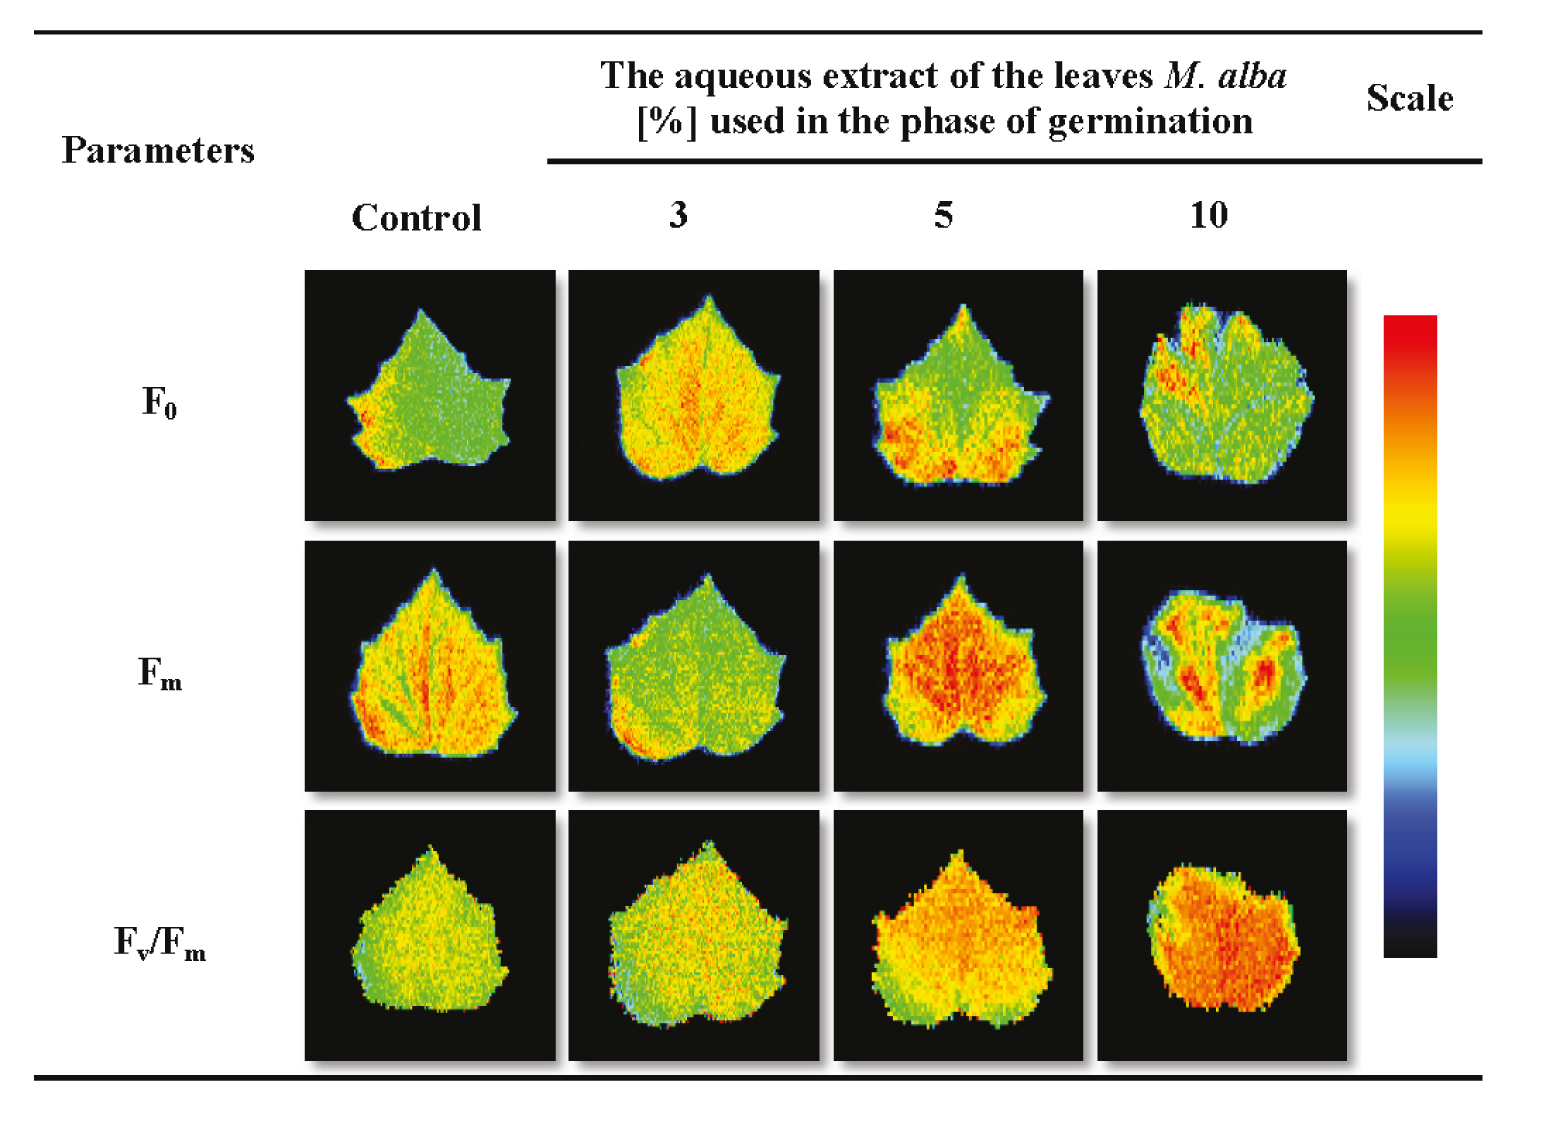 Fig. 3. Imaging of chlorophyll a fluorescence in leaves of studied plants based on the parameters F0, Fm, Fv/Fm treated by aqueous extracts from the leaves of Morus alba in the phase of germination for Cucumis sativus.